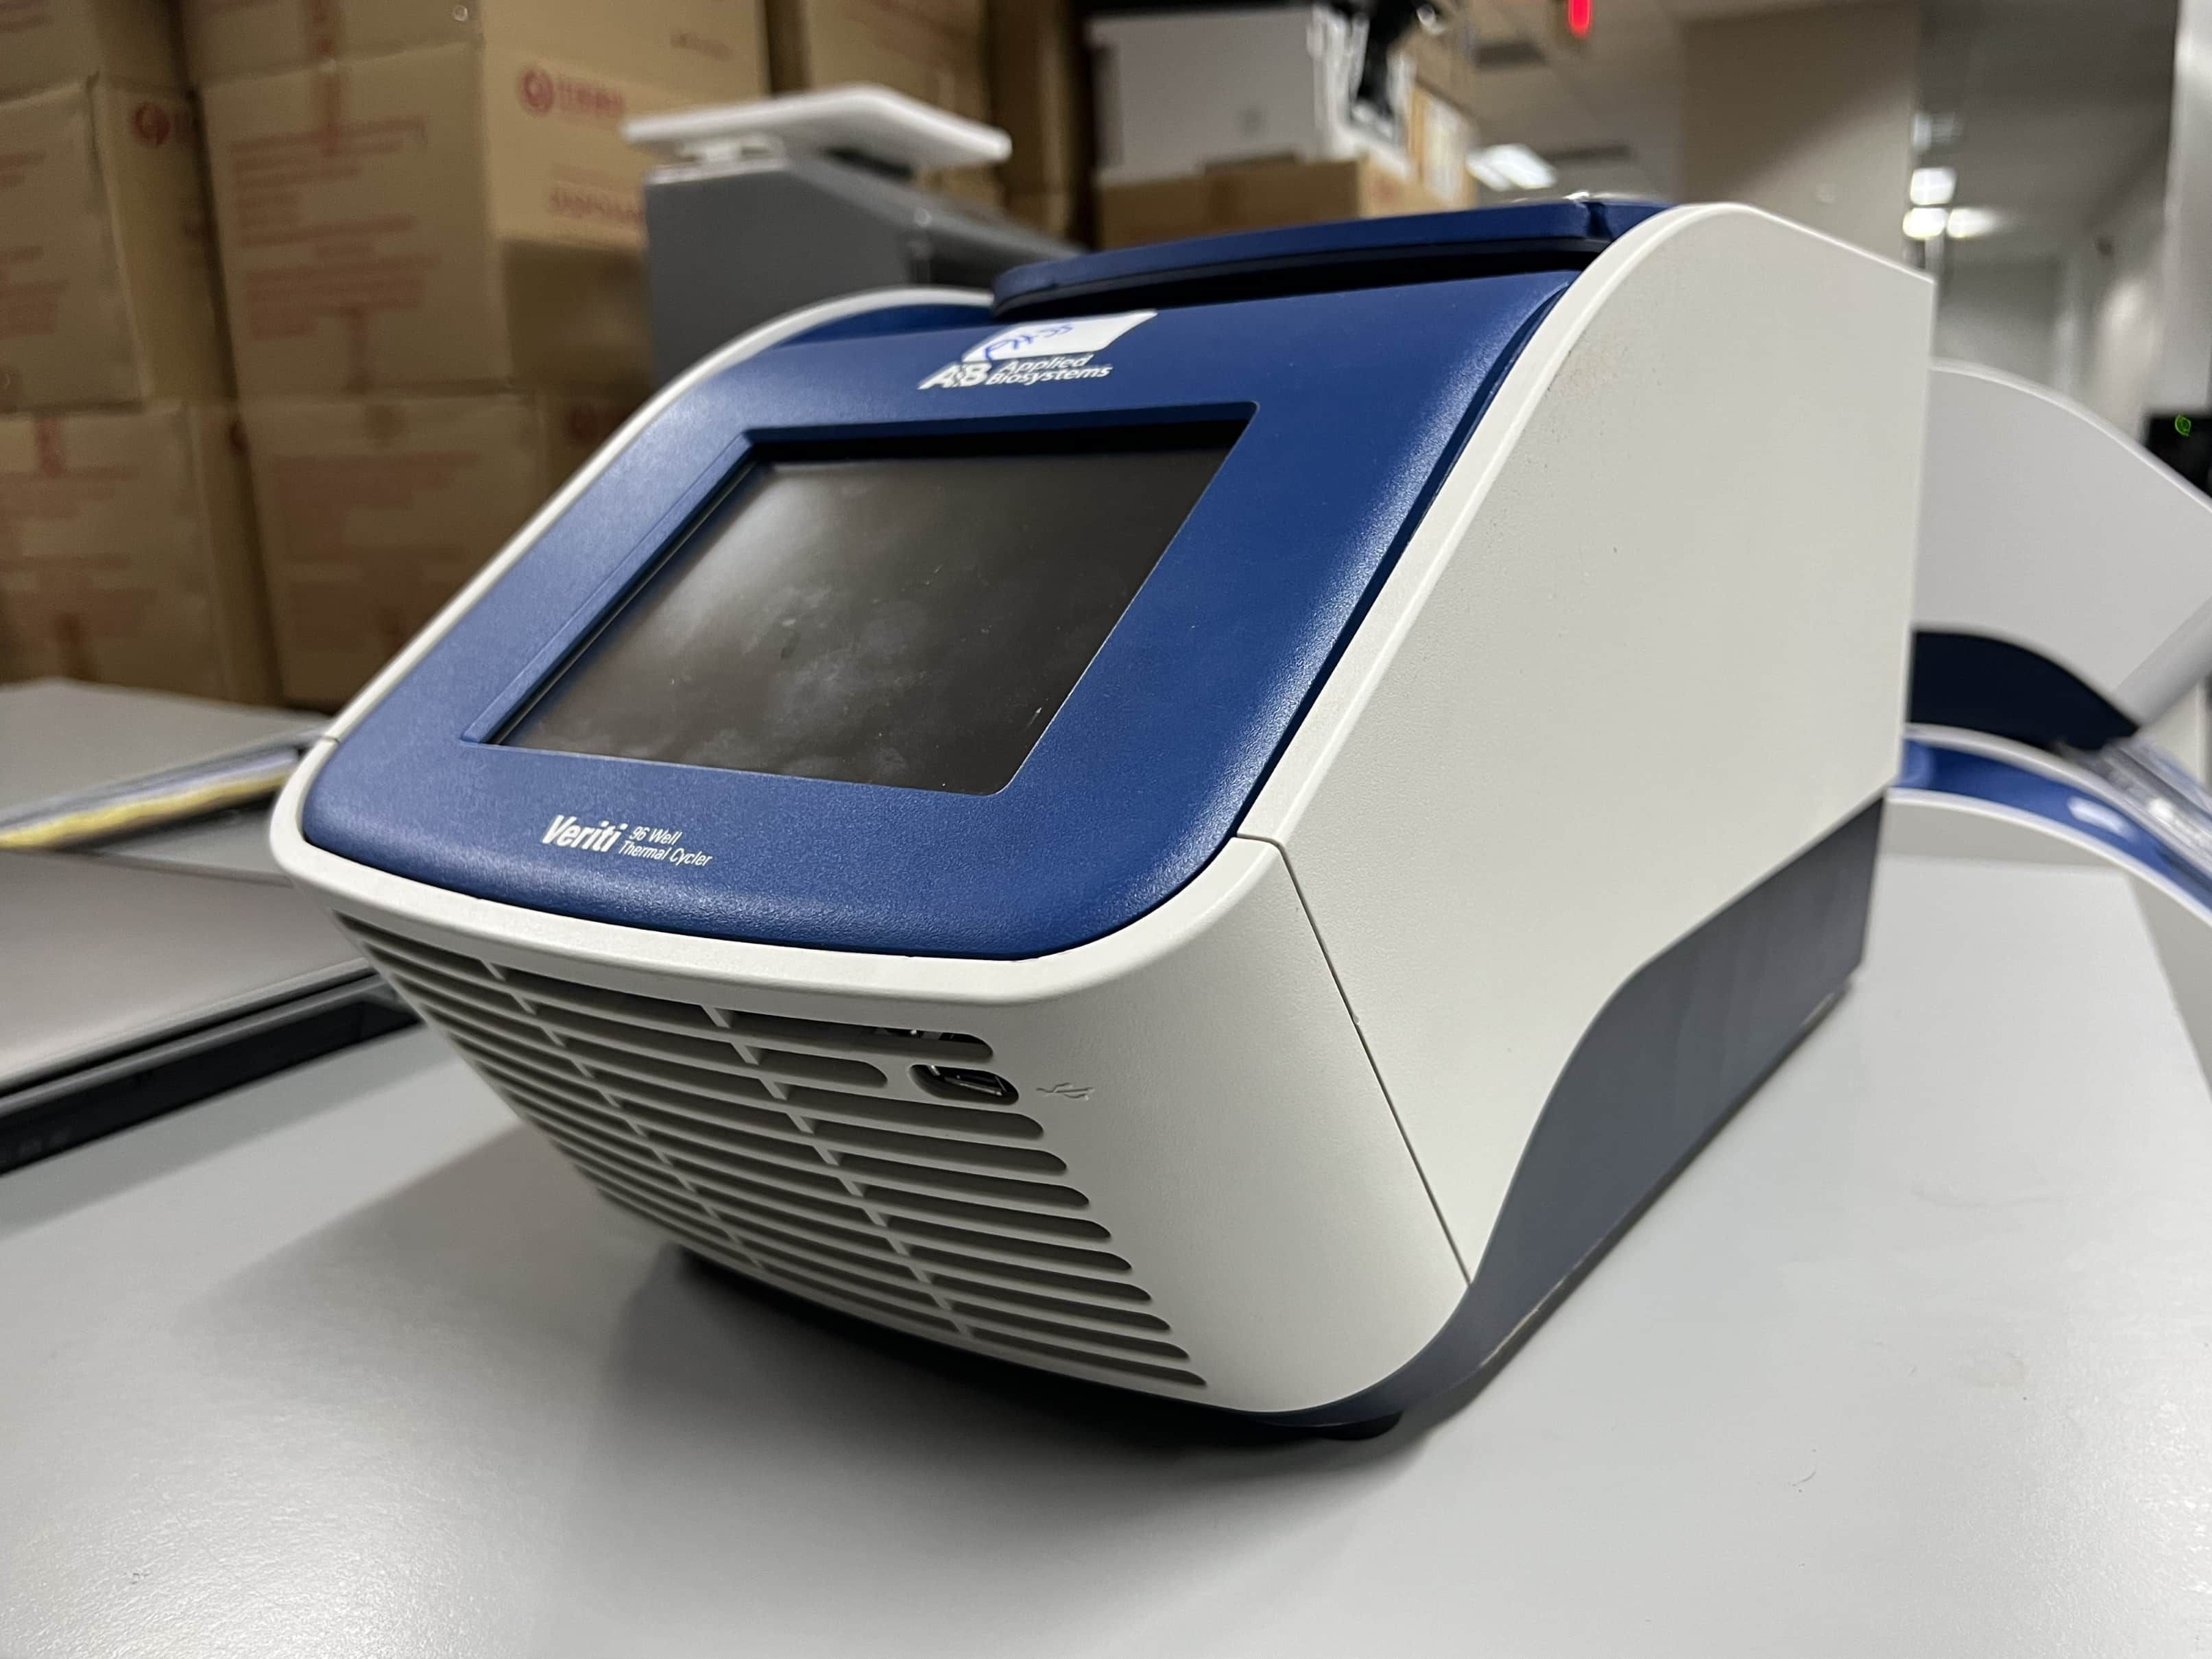 Applied biosystems VeritiPro Thermal Cycler